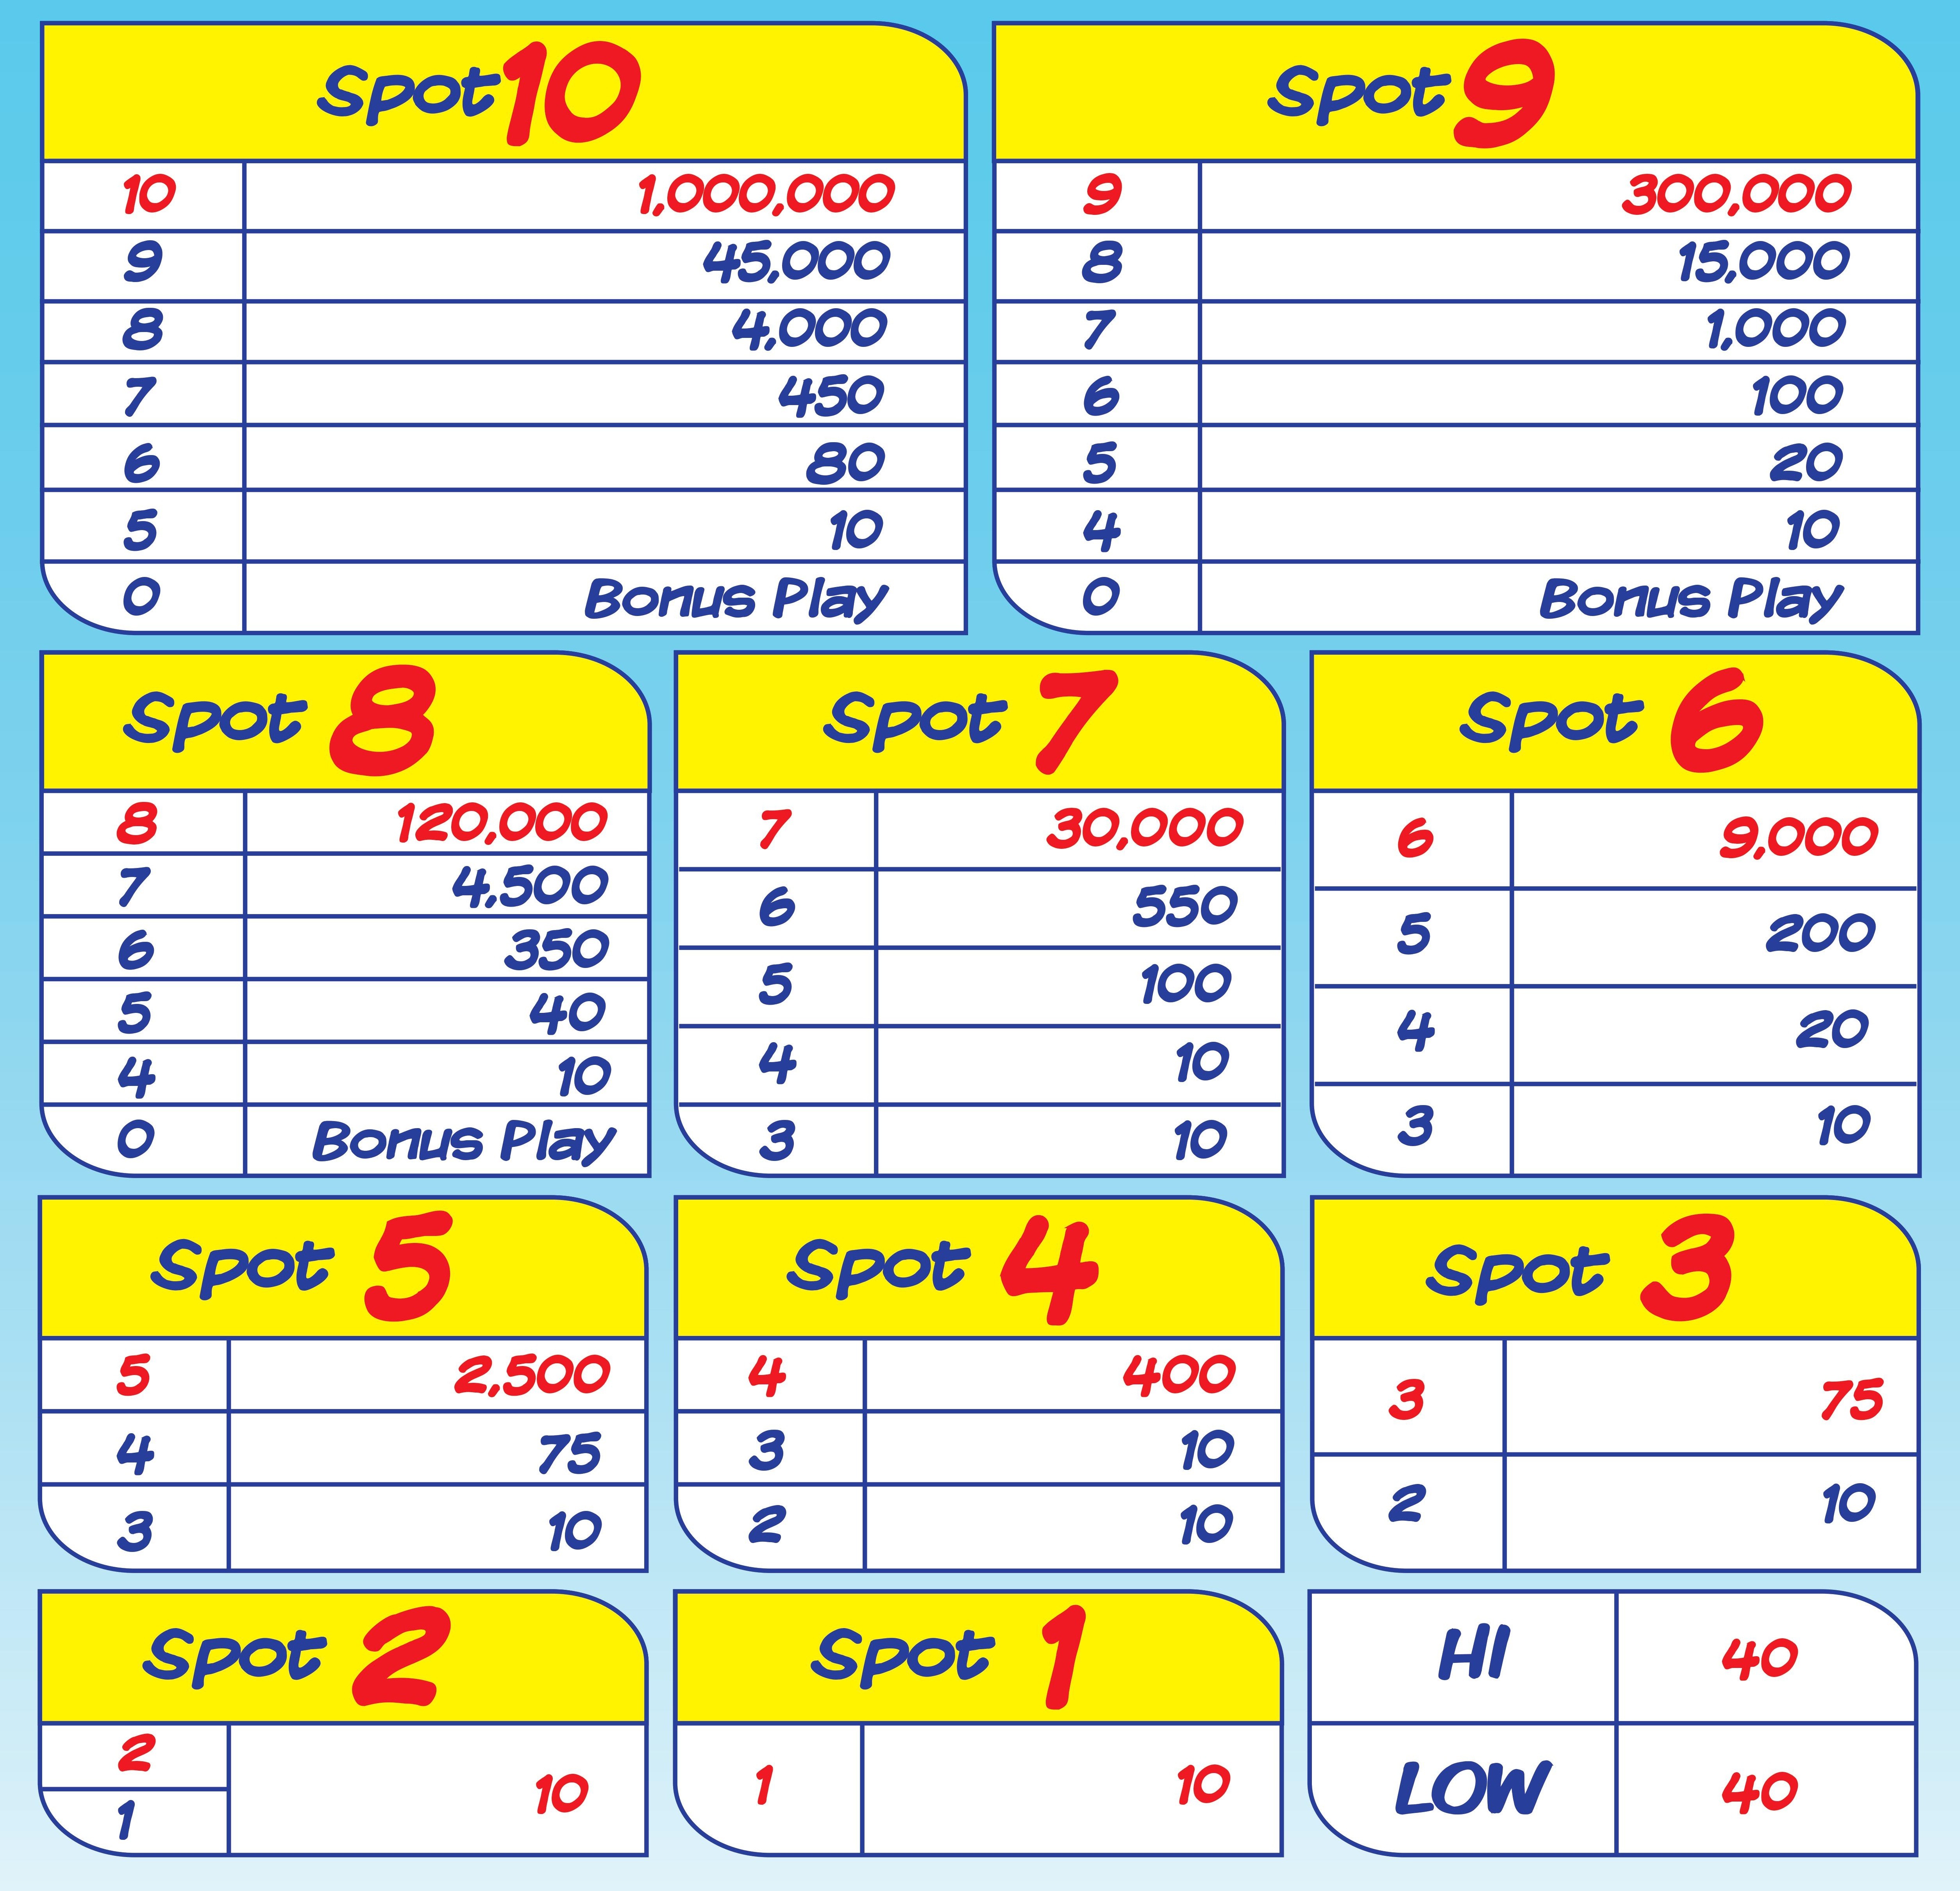 lotto 1 payouts